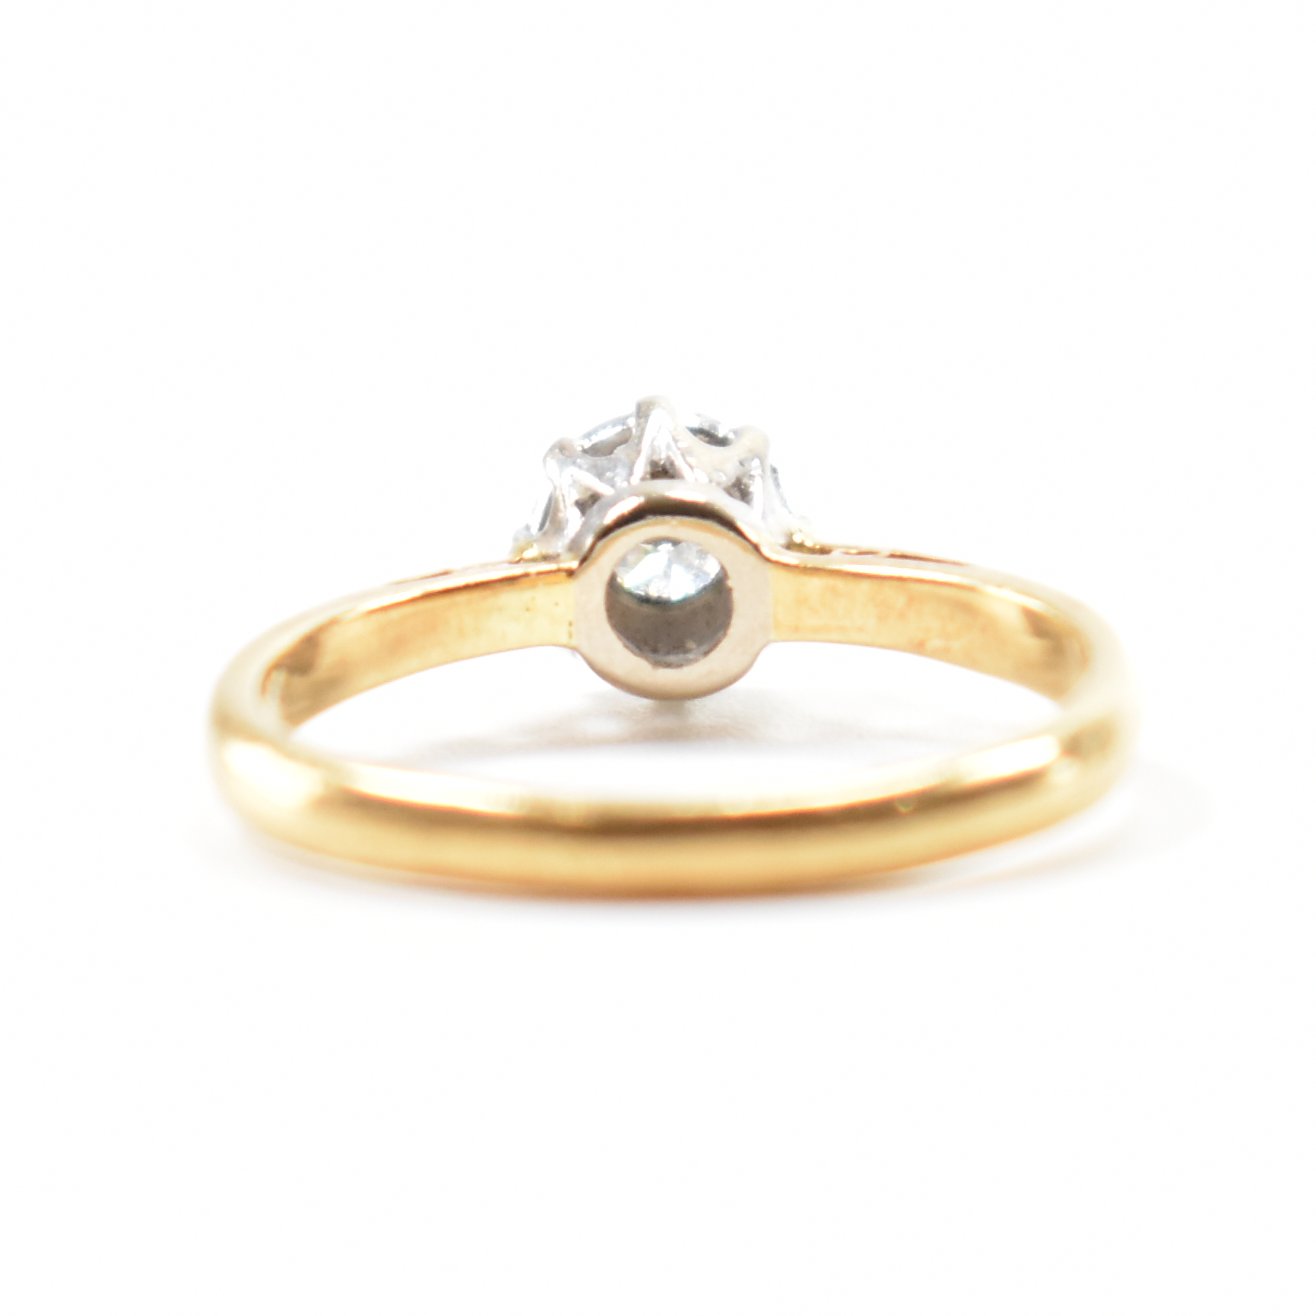 HALLMARKED 18CT GOLD & DIAMOND SOLITAIRE RING - Image 3 of 8